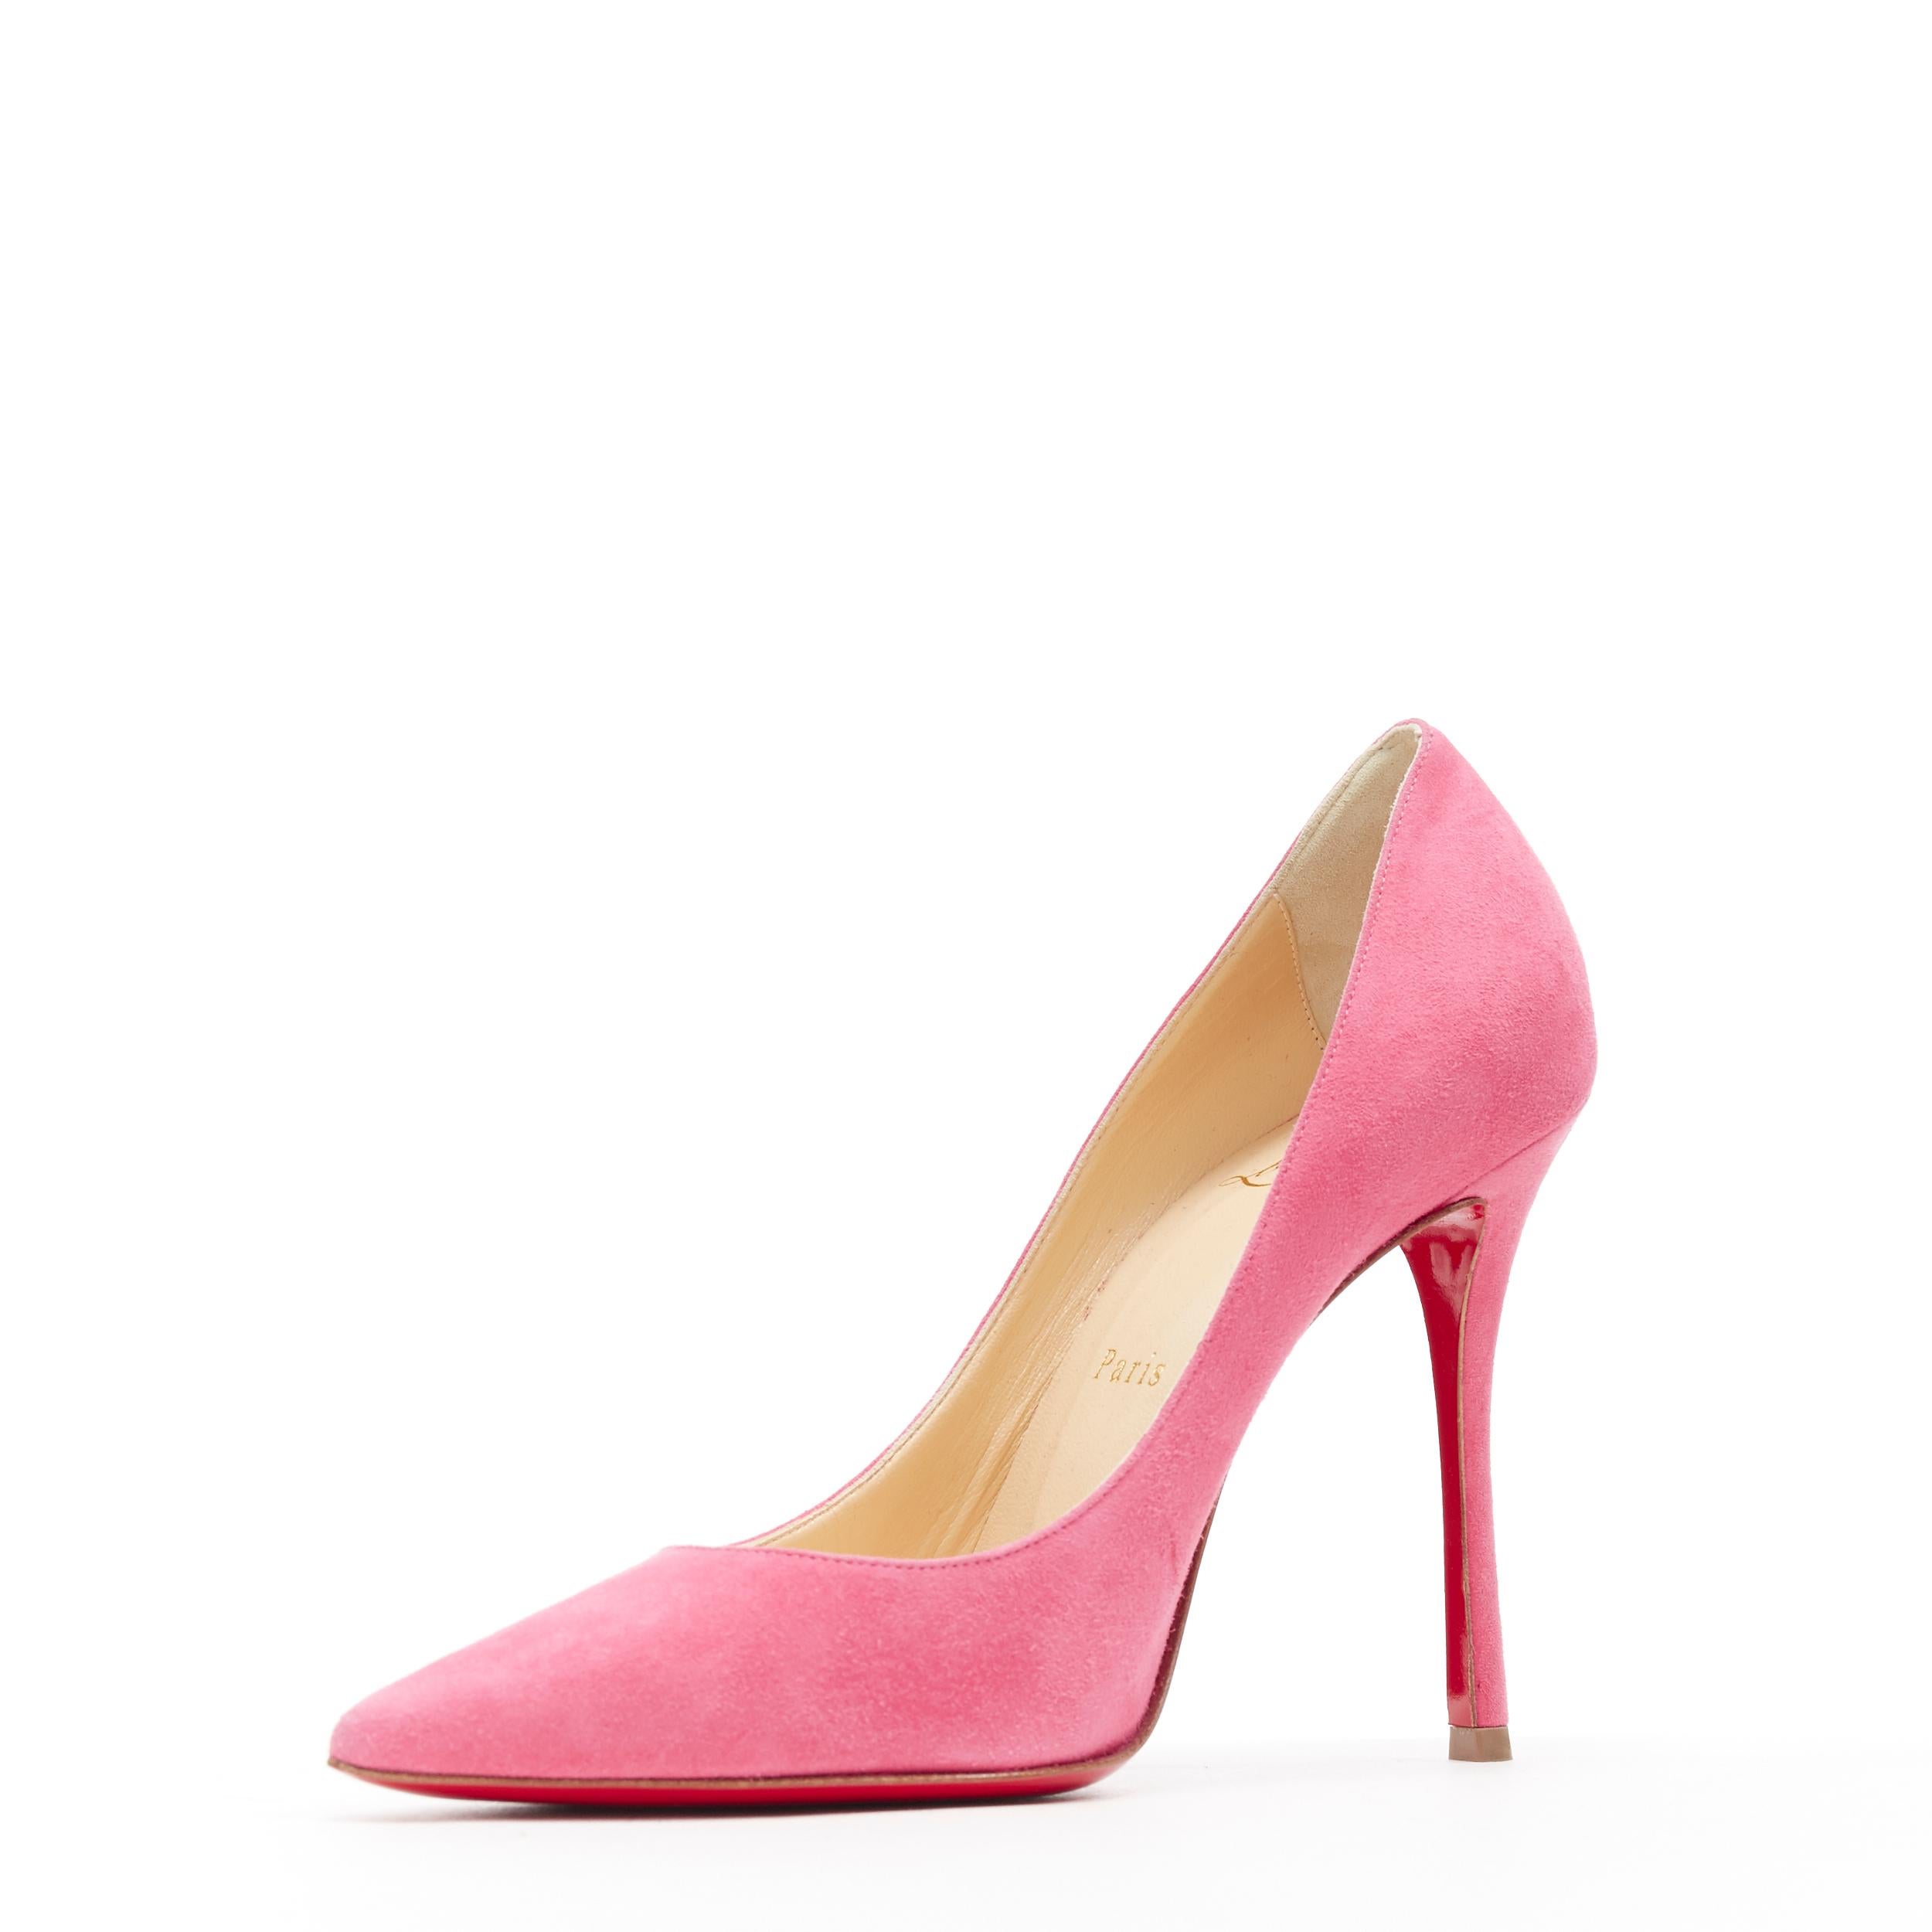 Pink CHRISTIAN LOUBOUTIN pink suede leather pointy toe stiletto pigalle pump EU38